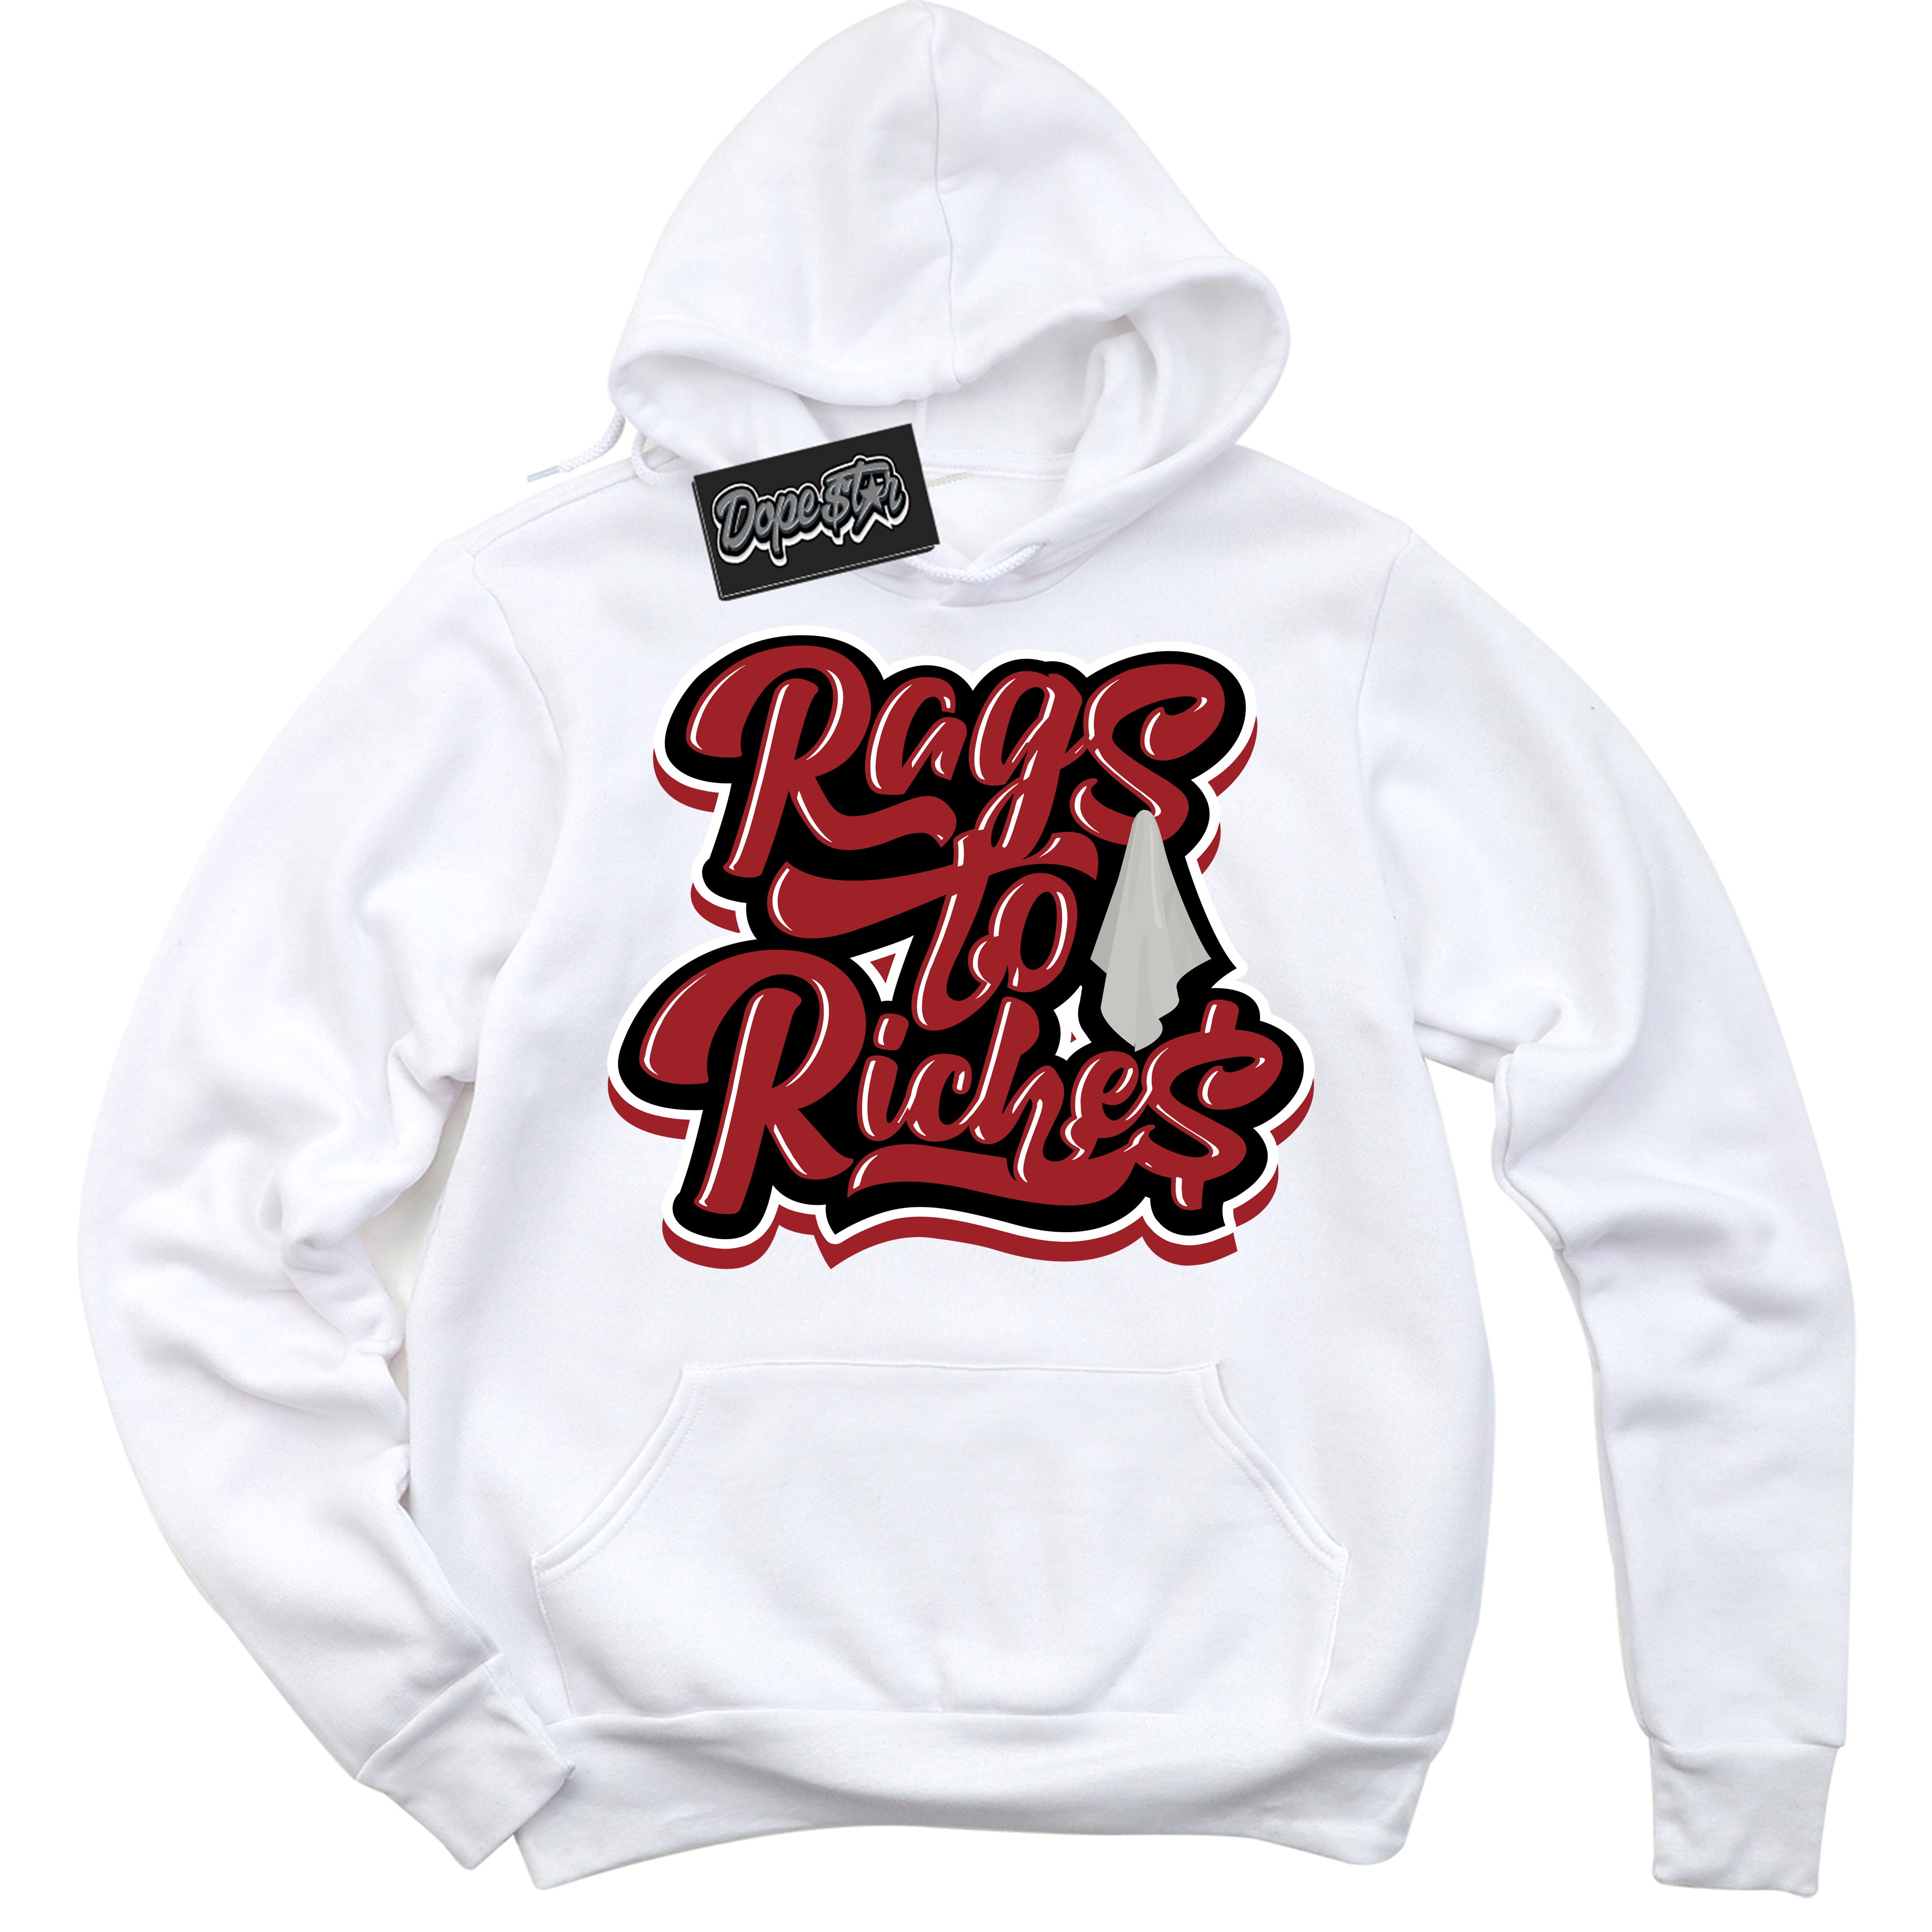 Cool White Hoodie With “ Rags To Riches “  Design That Perfectly Matches Lost And Found 1s Sneakers.